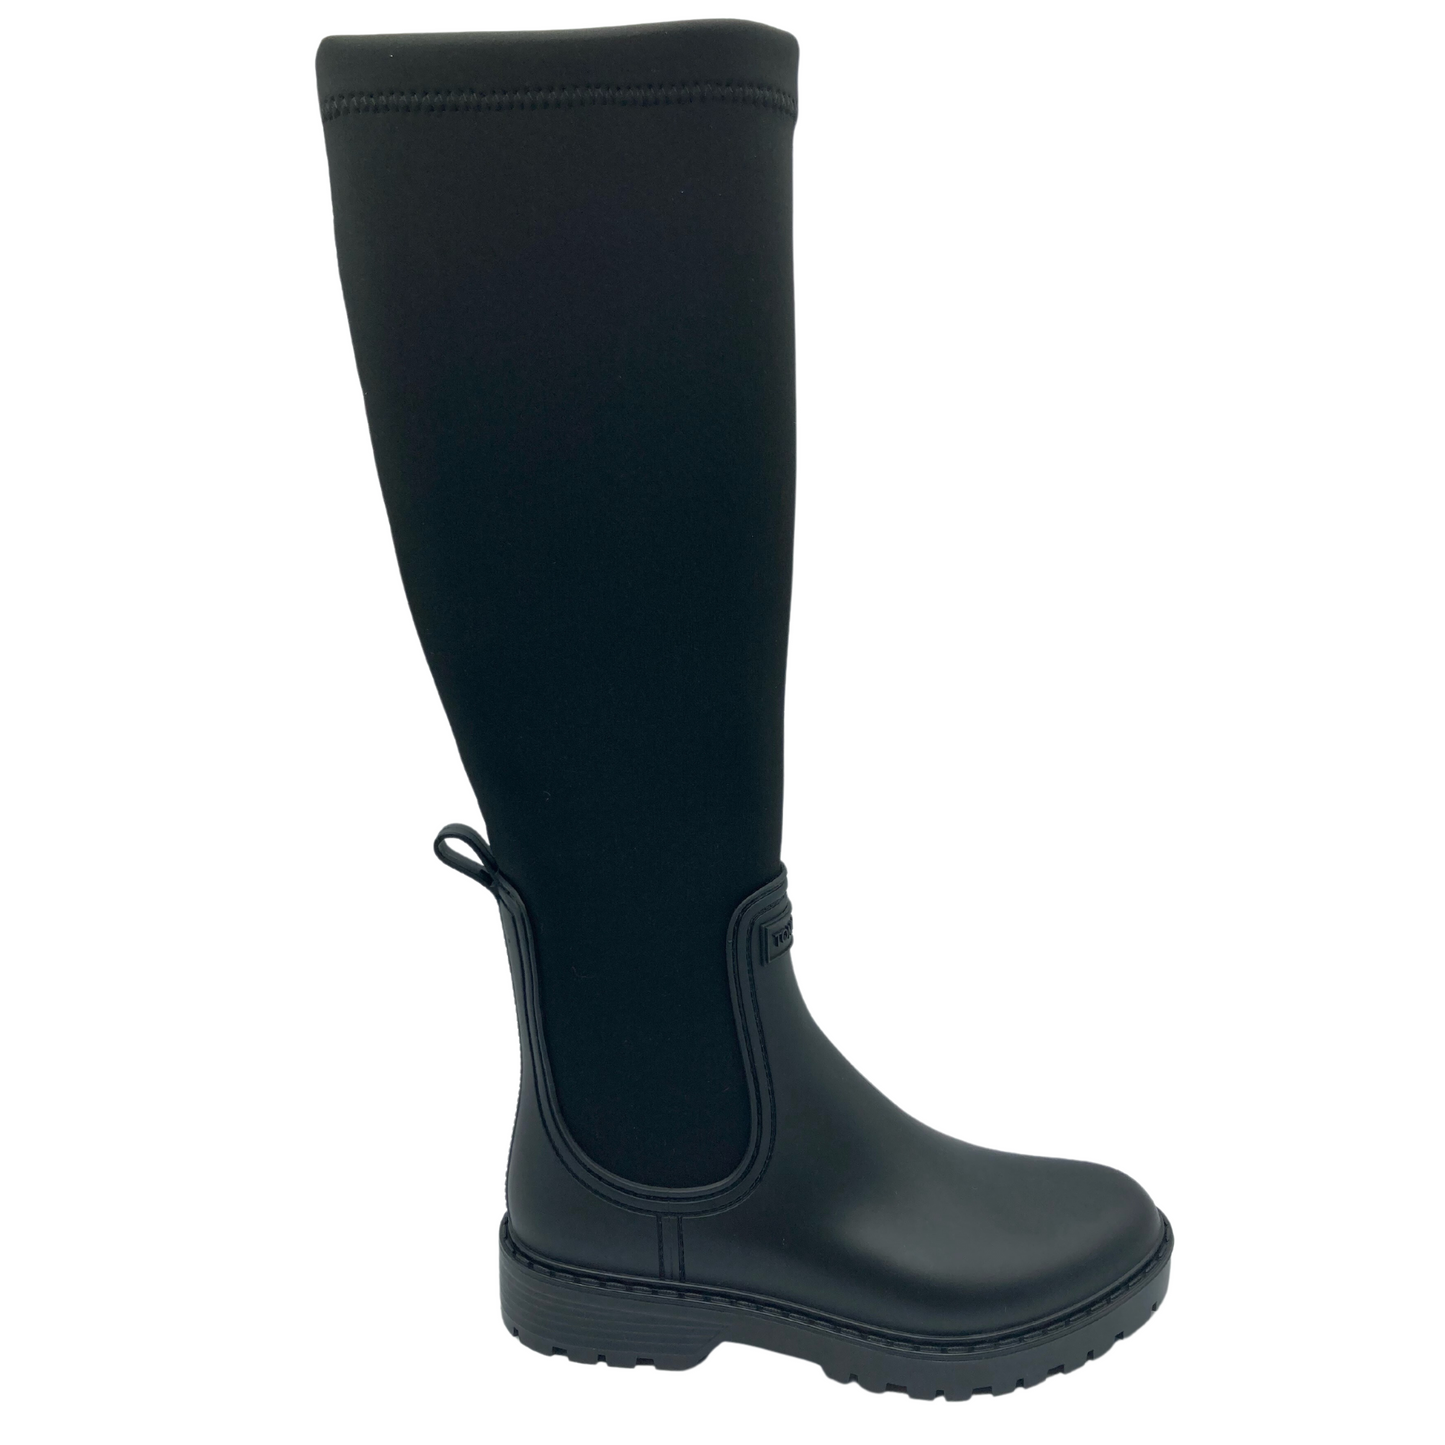 Right facing view of tall black waterproof boot with rubber sole and upper with lycra shaft